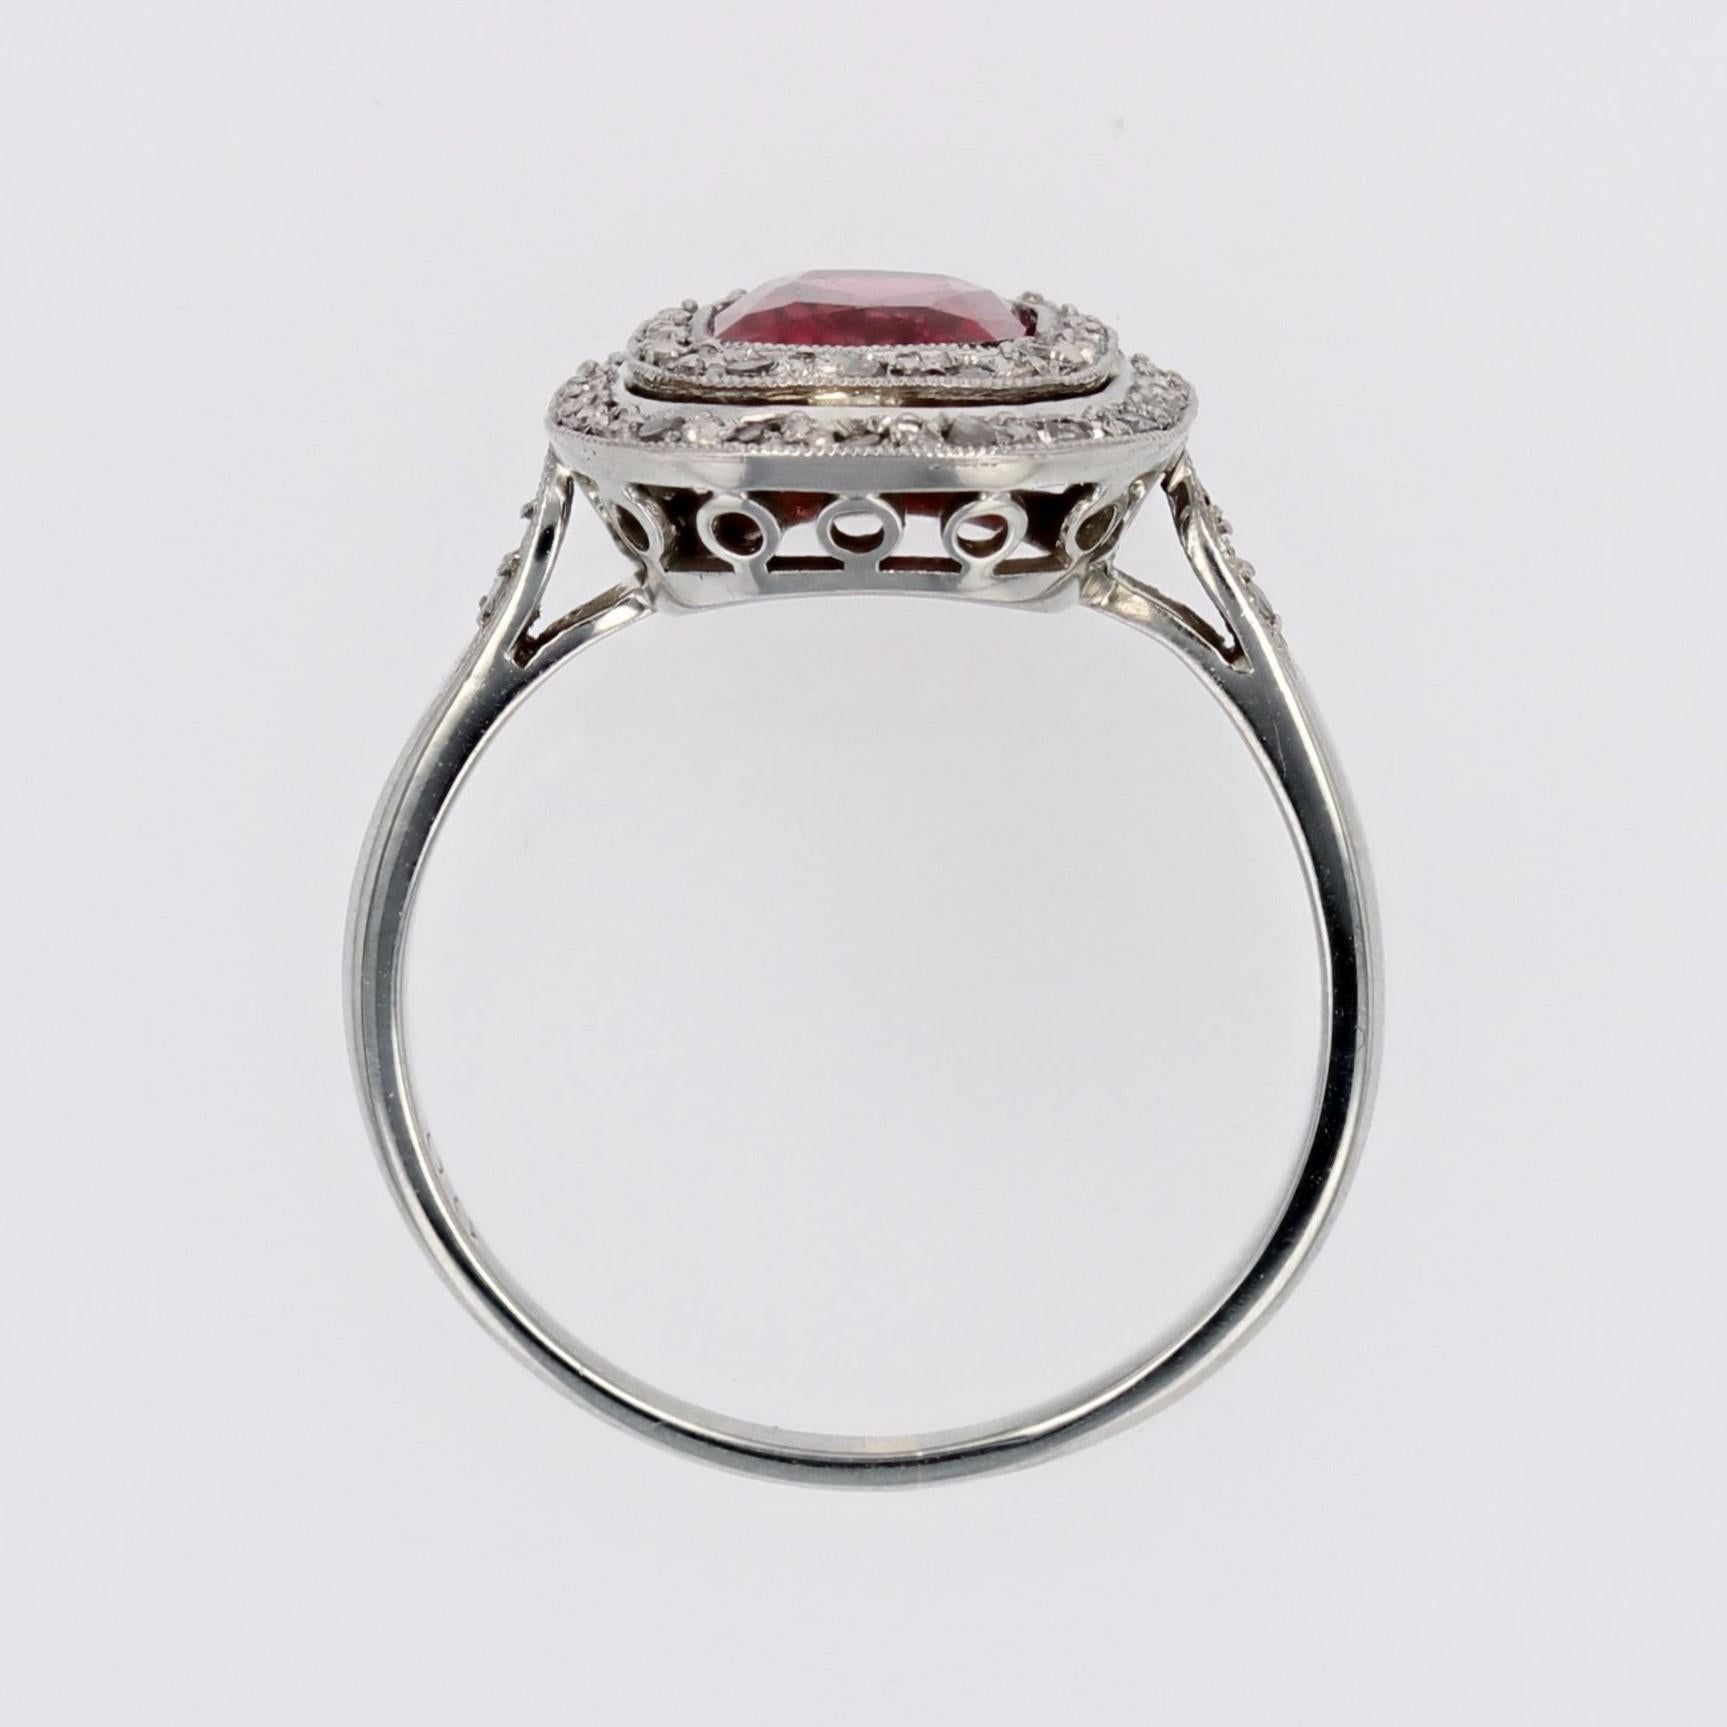 French 1930s 1.20 Carat Red Spinel Diamonds 18 Karat White Gold Ring For Sale 9